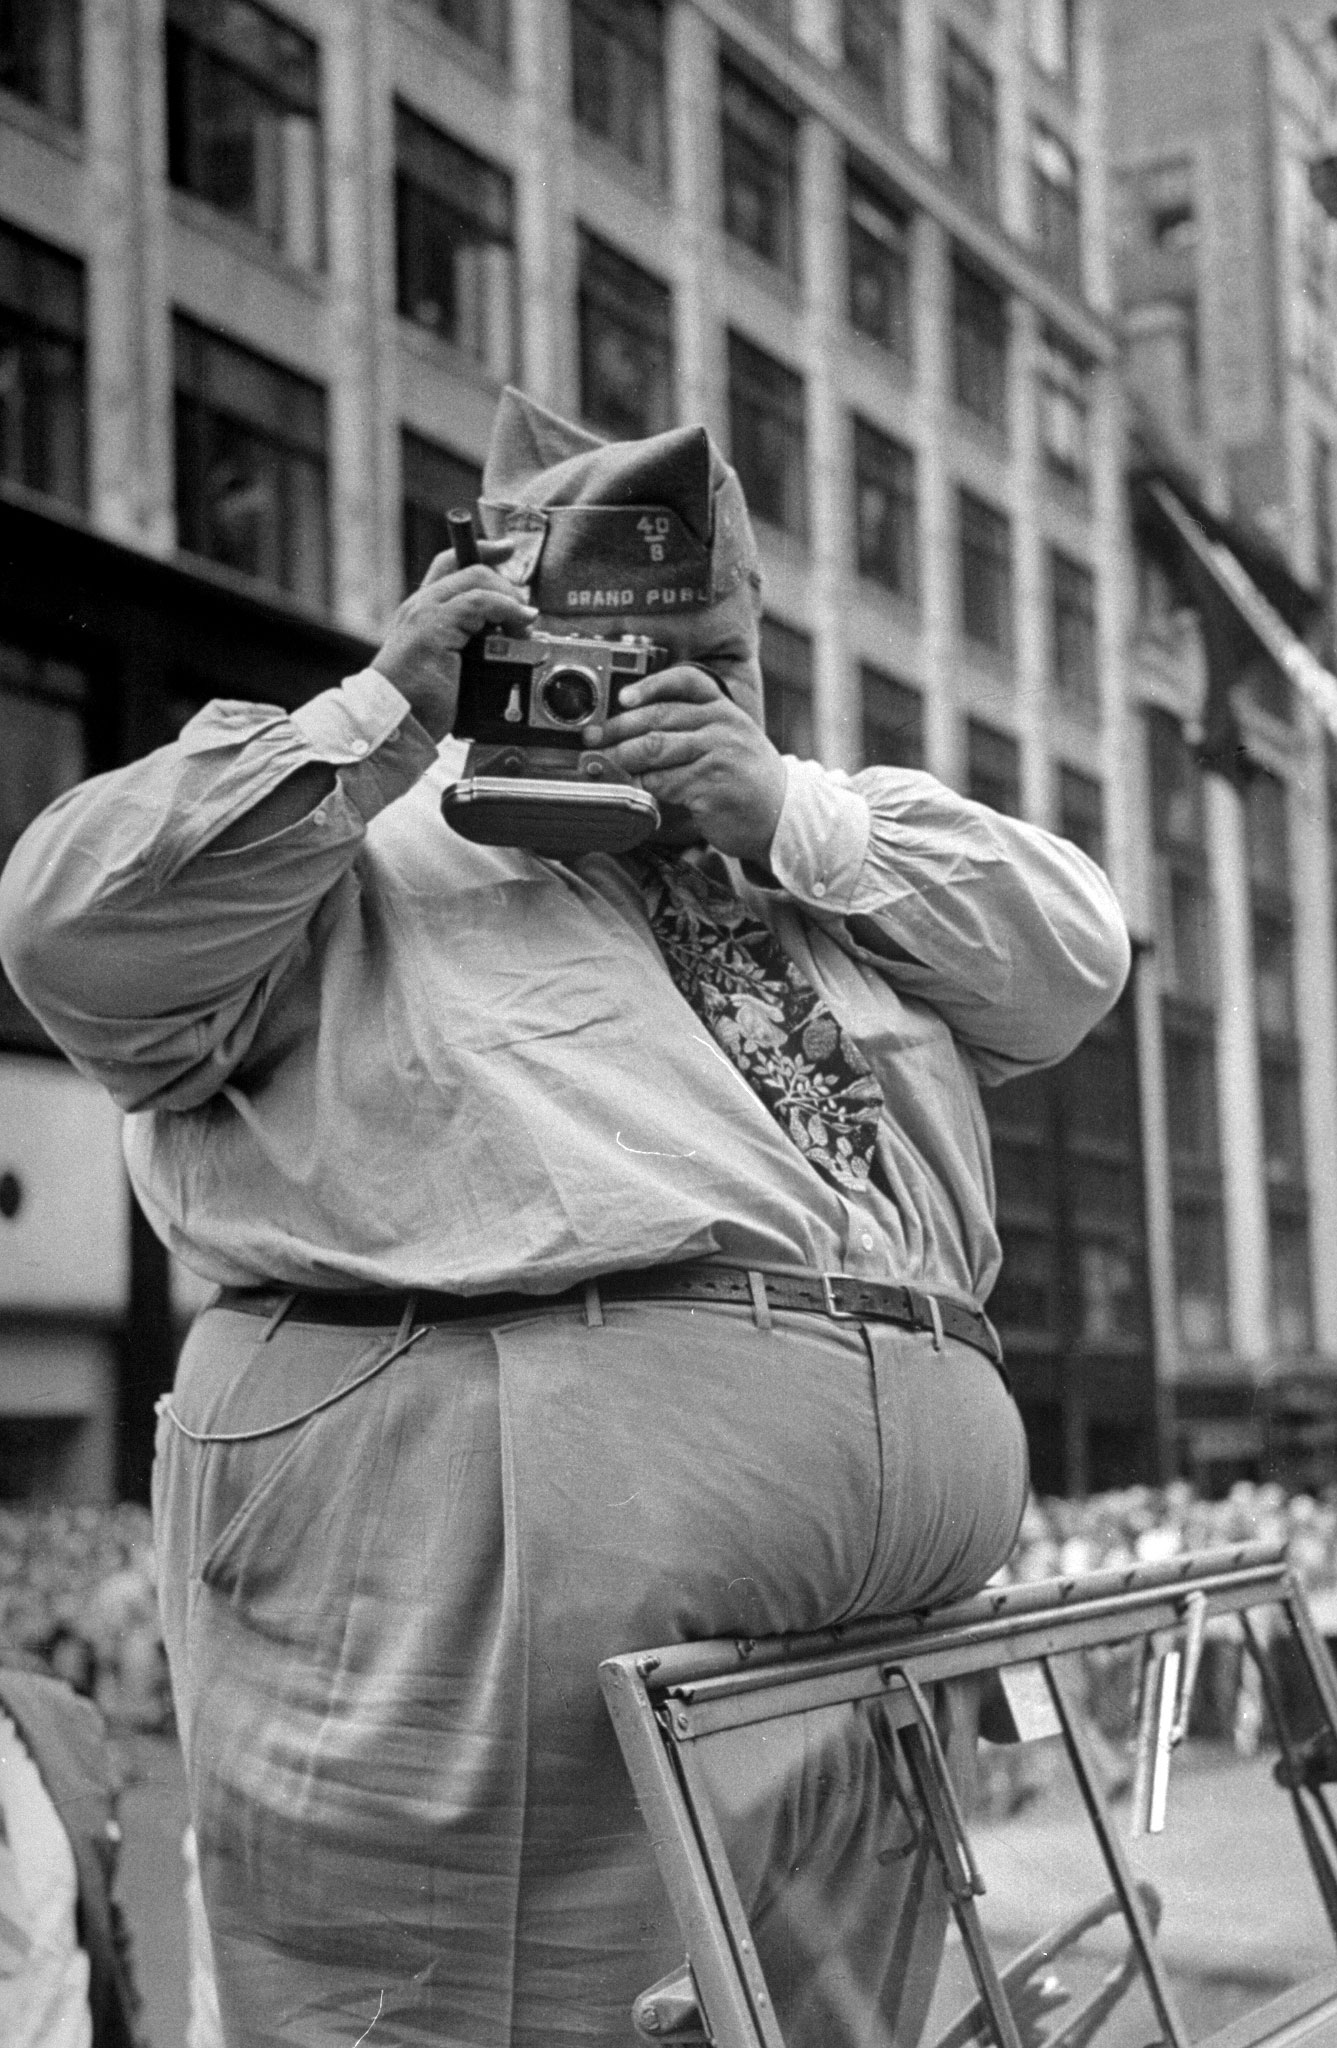 A large man taking photos while standing